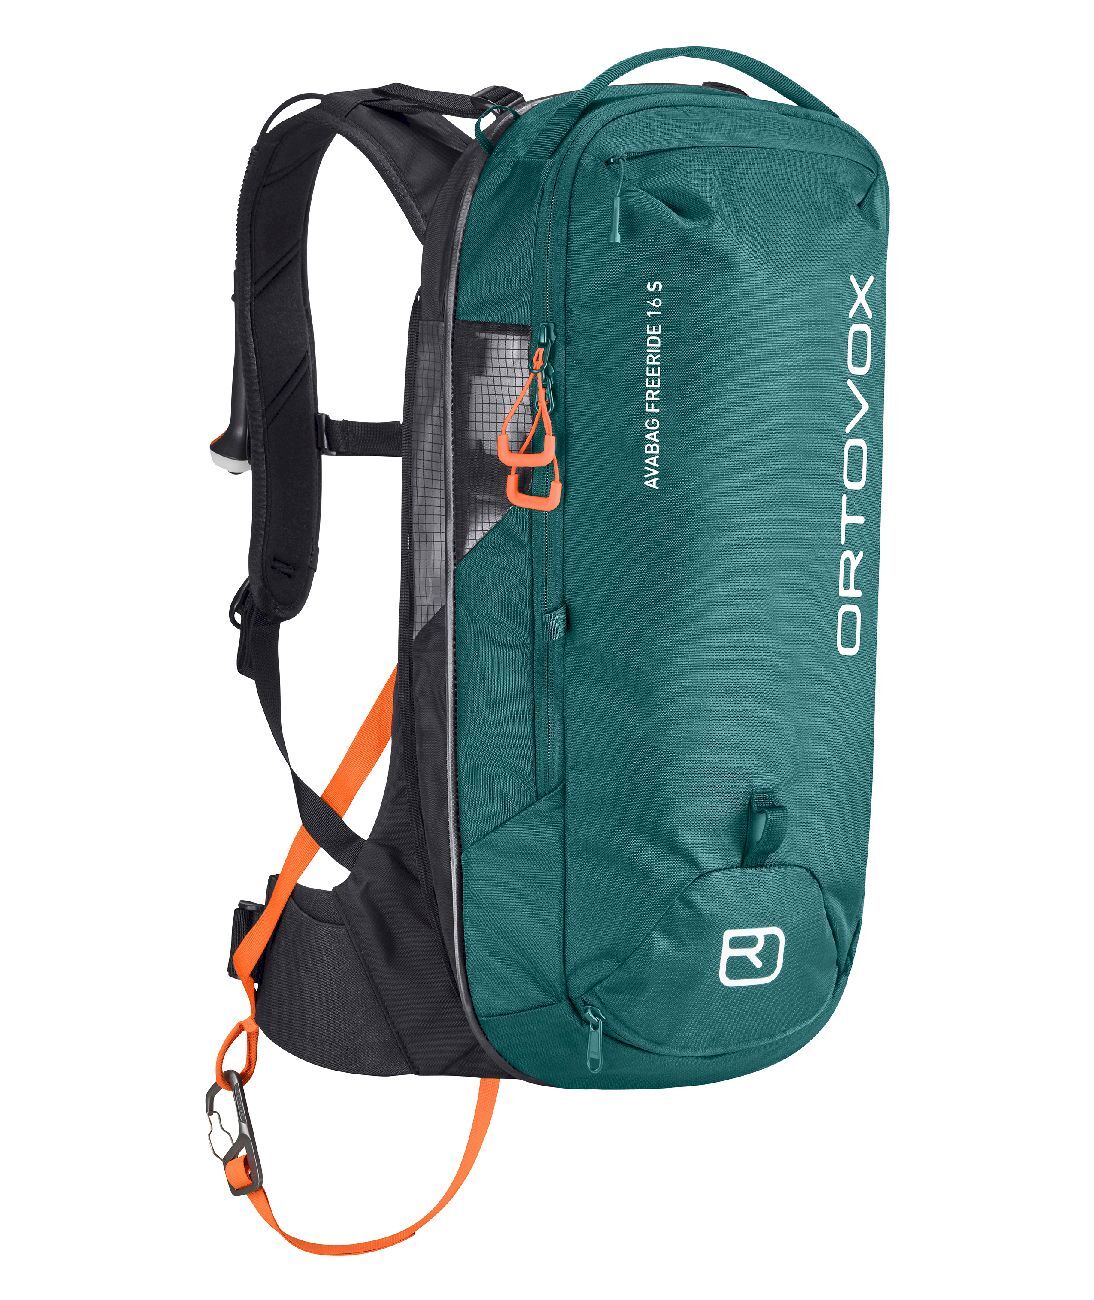 Ortovox Avabag Litric Freeride 16S - Avalanche airbag backpack